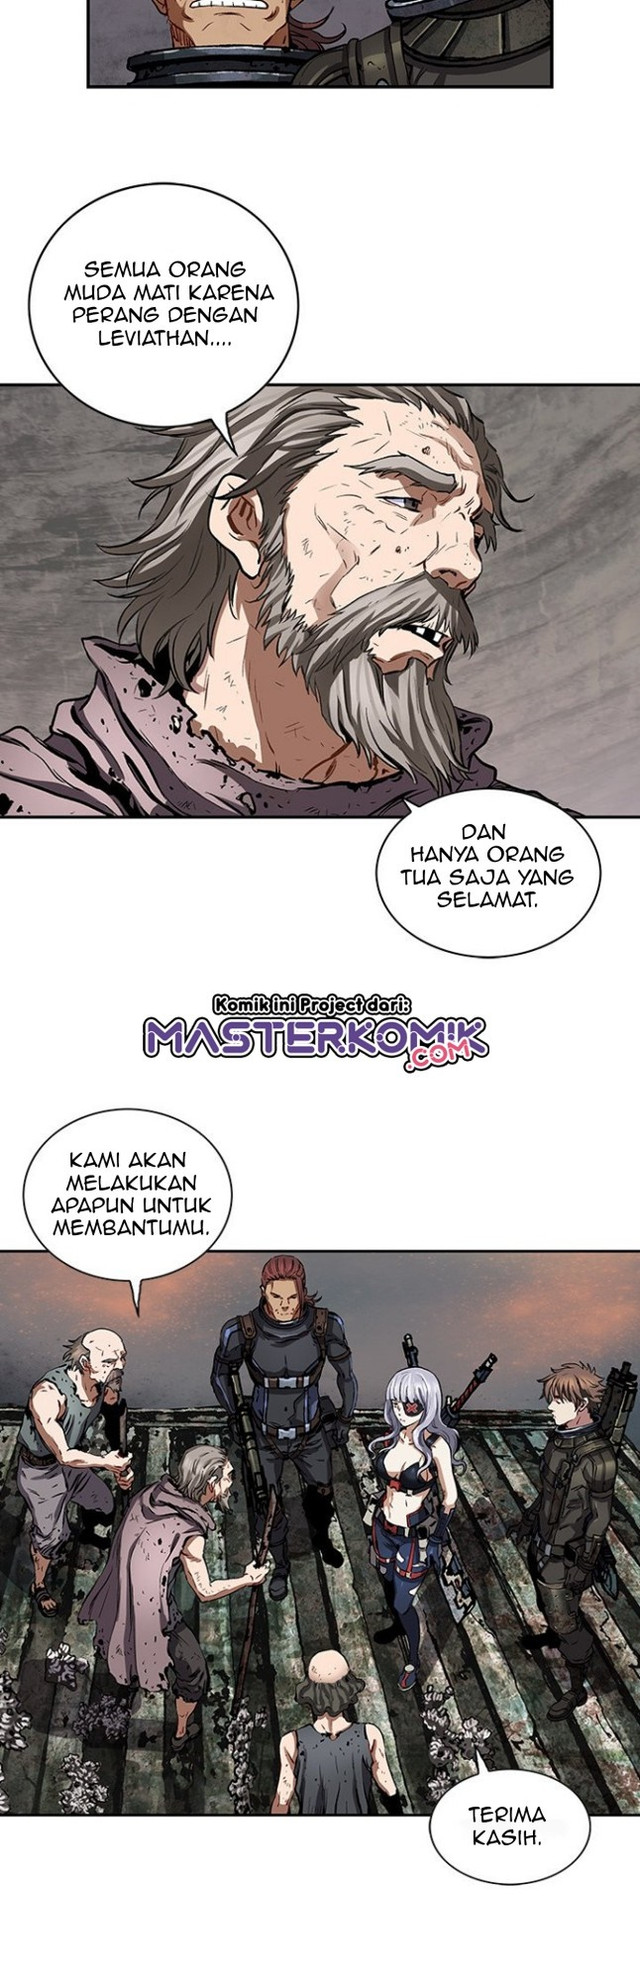 Leviathan Chapter 170 11